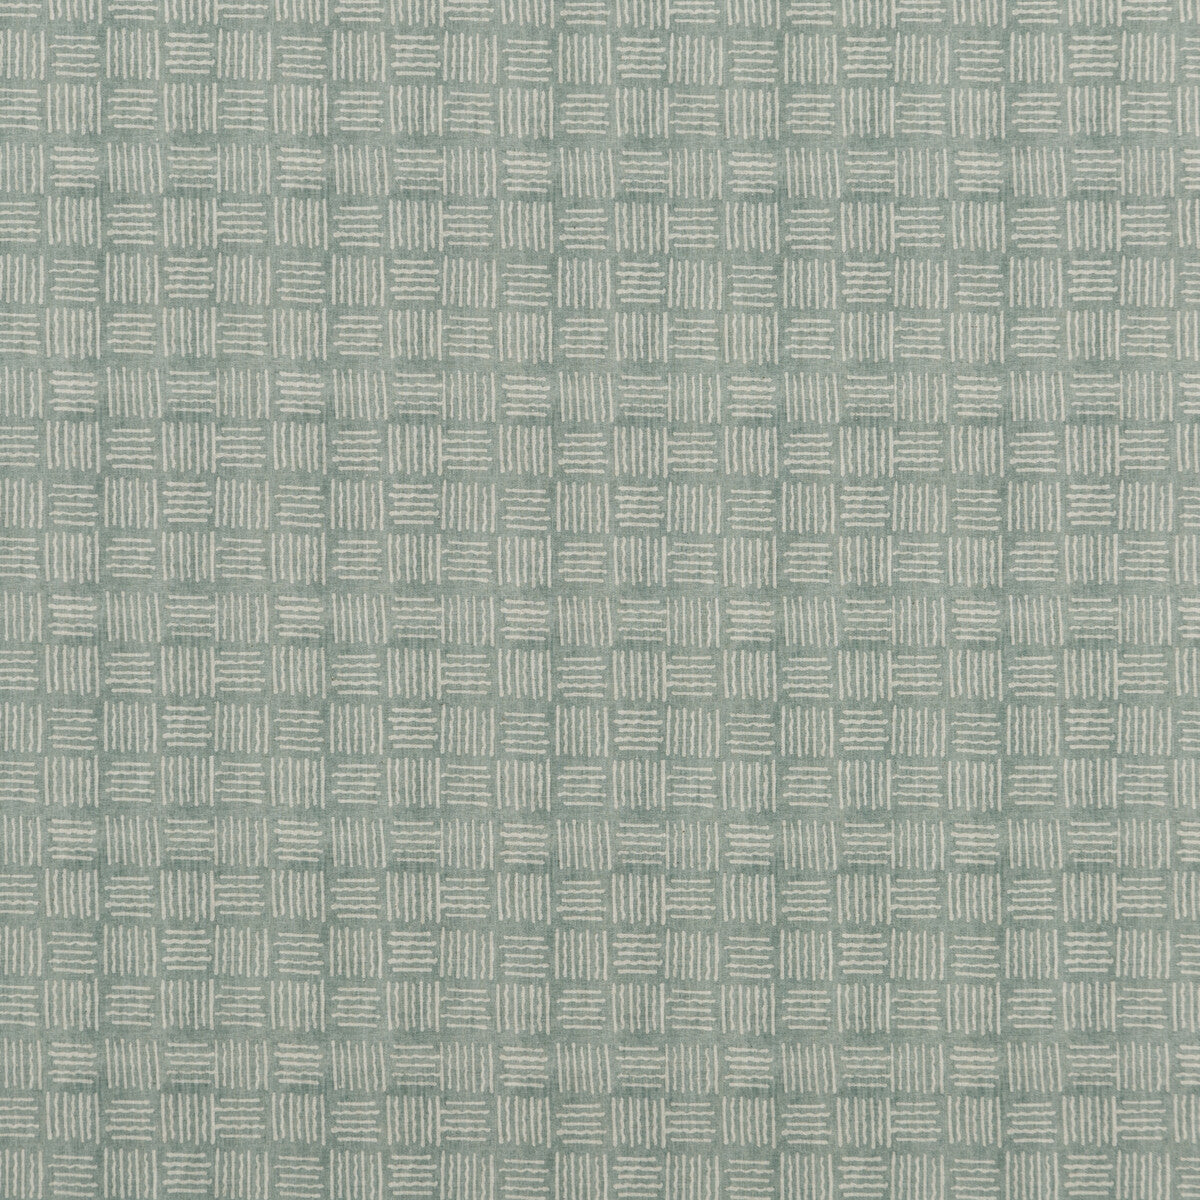 Salsa Square fabric in aqua color - pattern PP50441.3.0 - by Baker Lifestyle in the Carnival collection